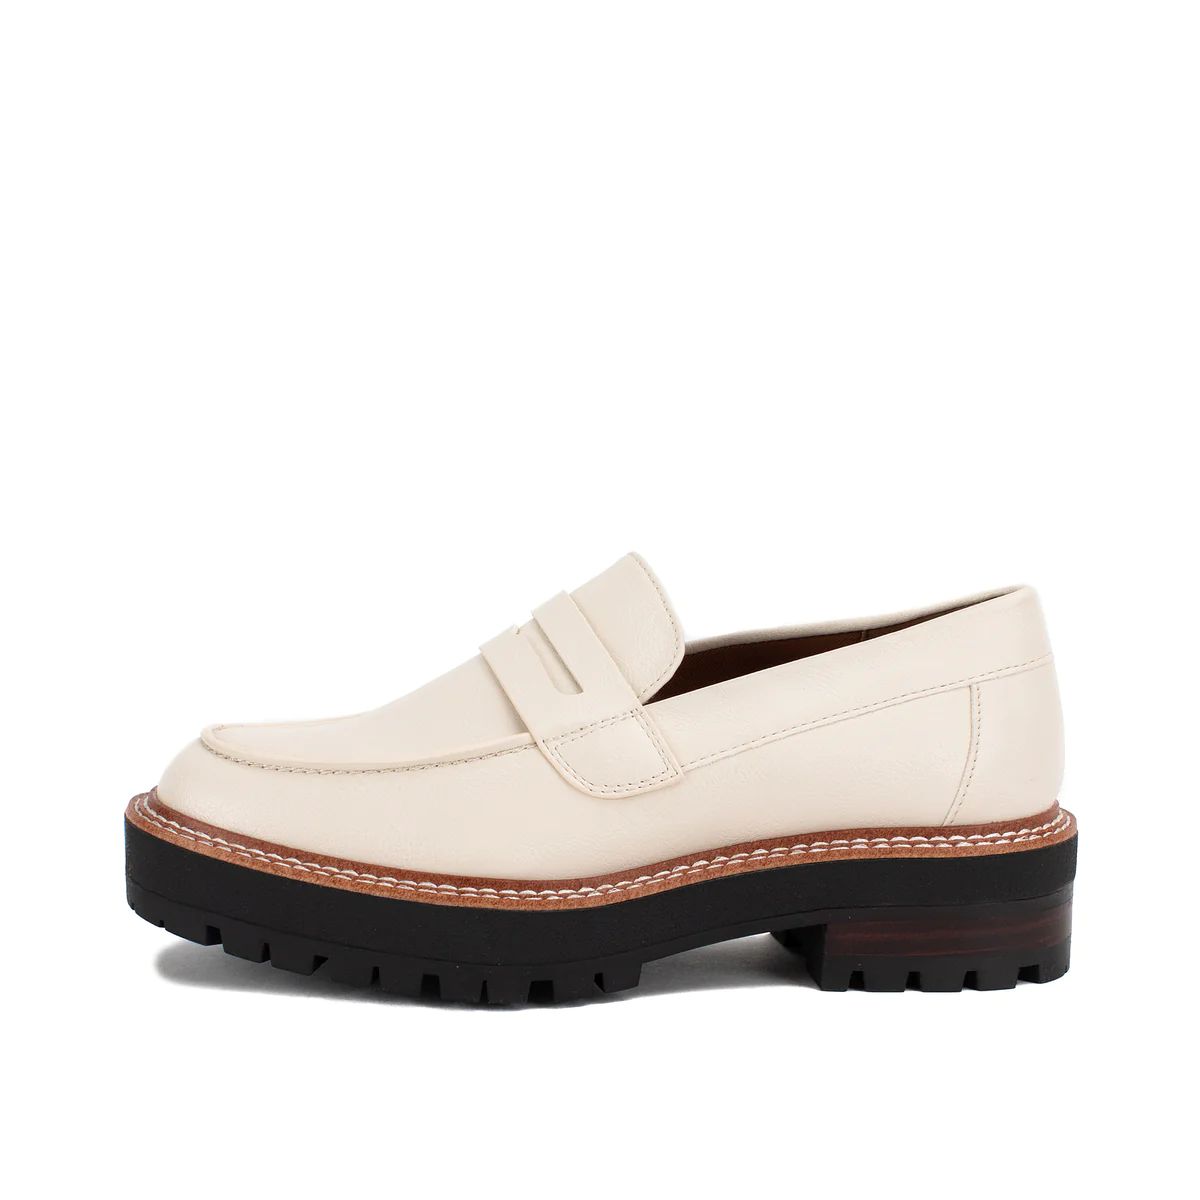 Sherry Lug Sole Loafer | Yellow Box Official Site | Yellow Box